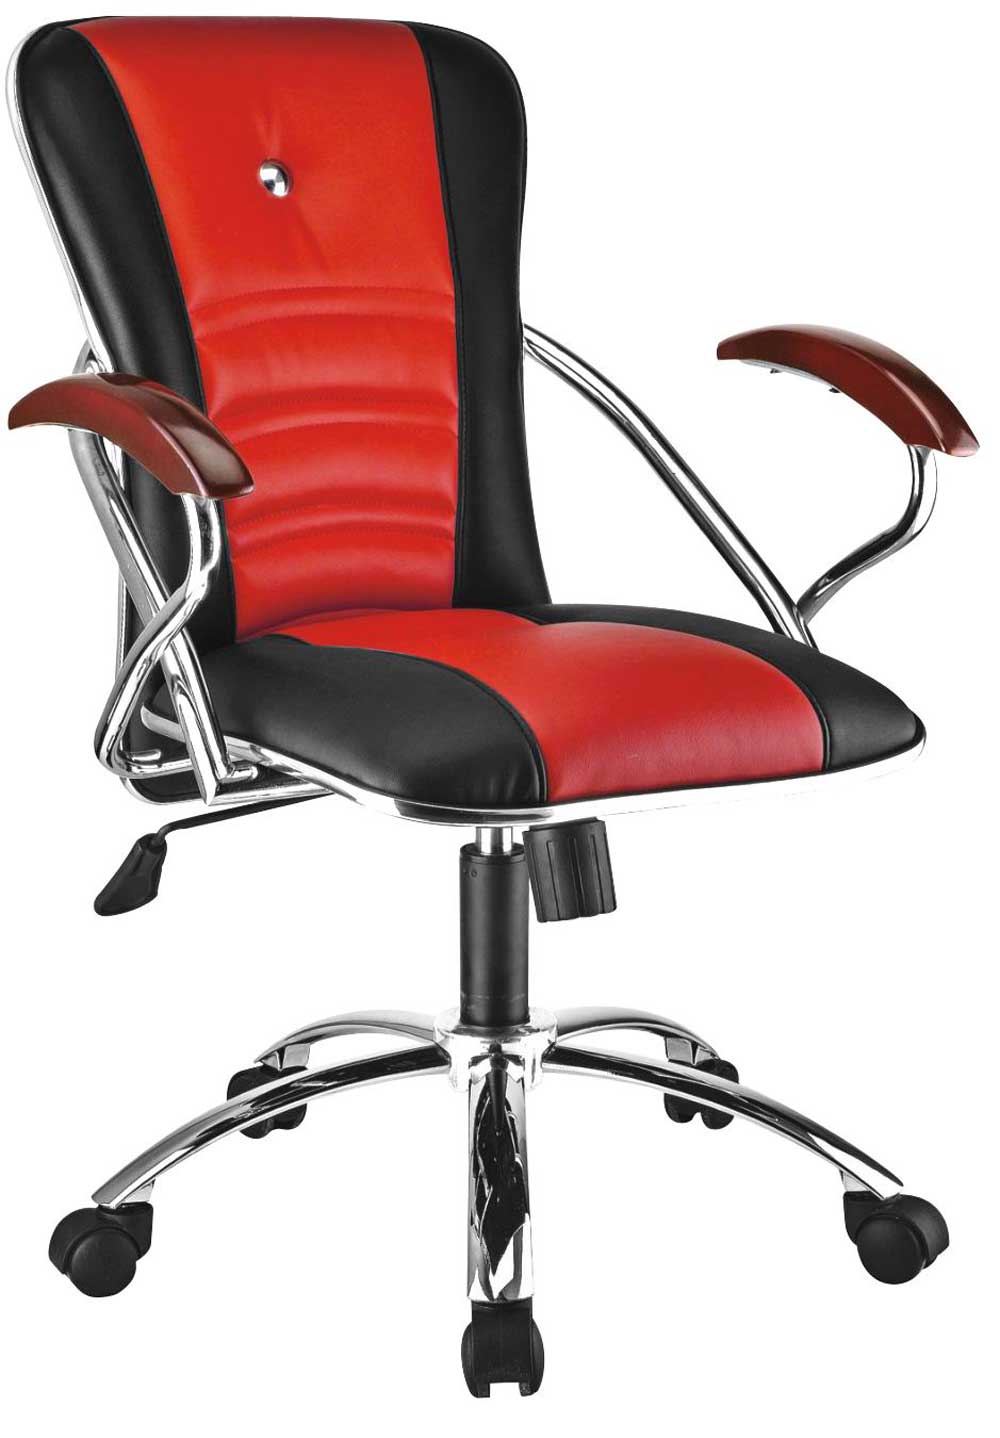 Red Office Chairs as Stunning Furnishing